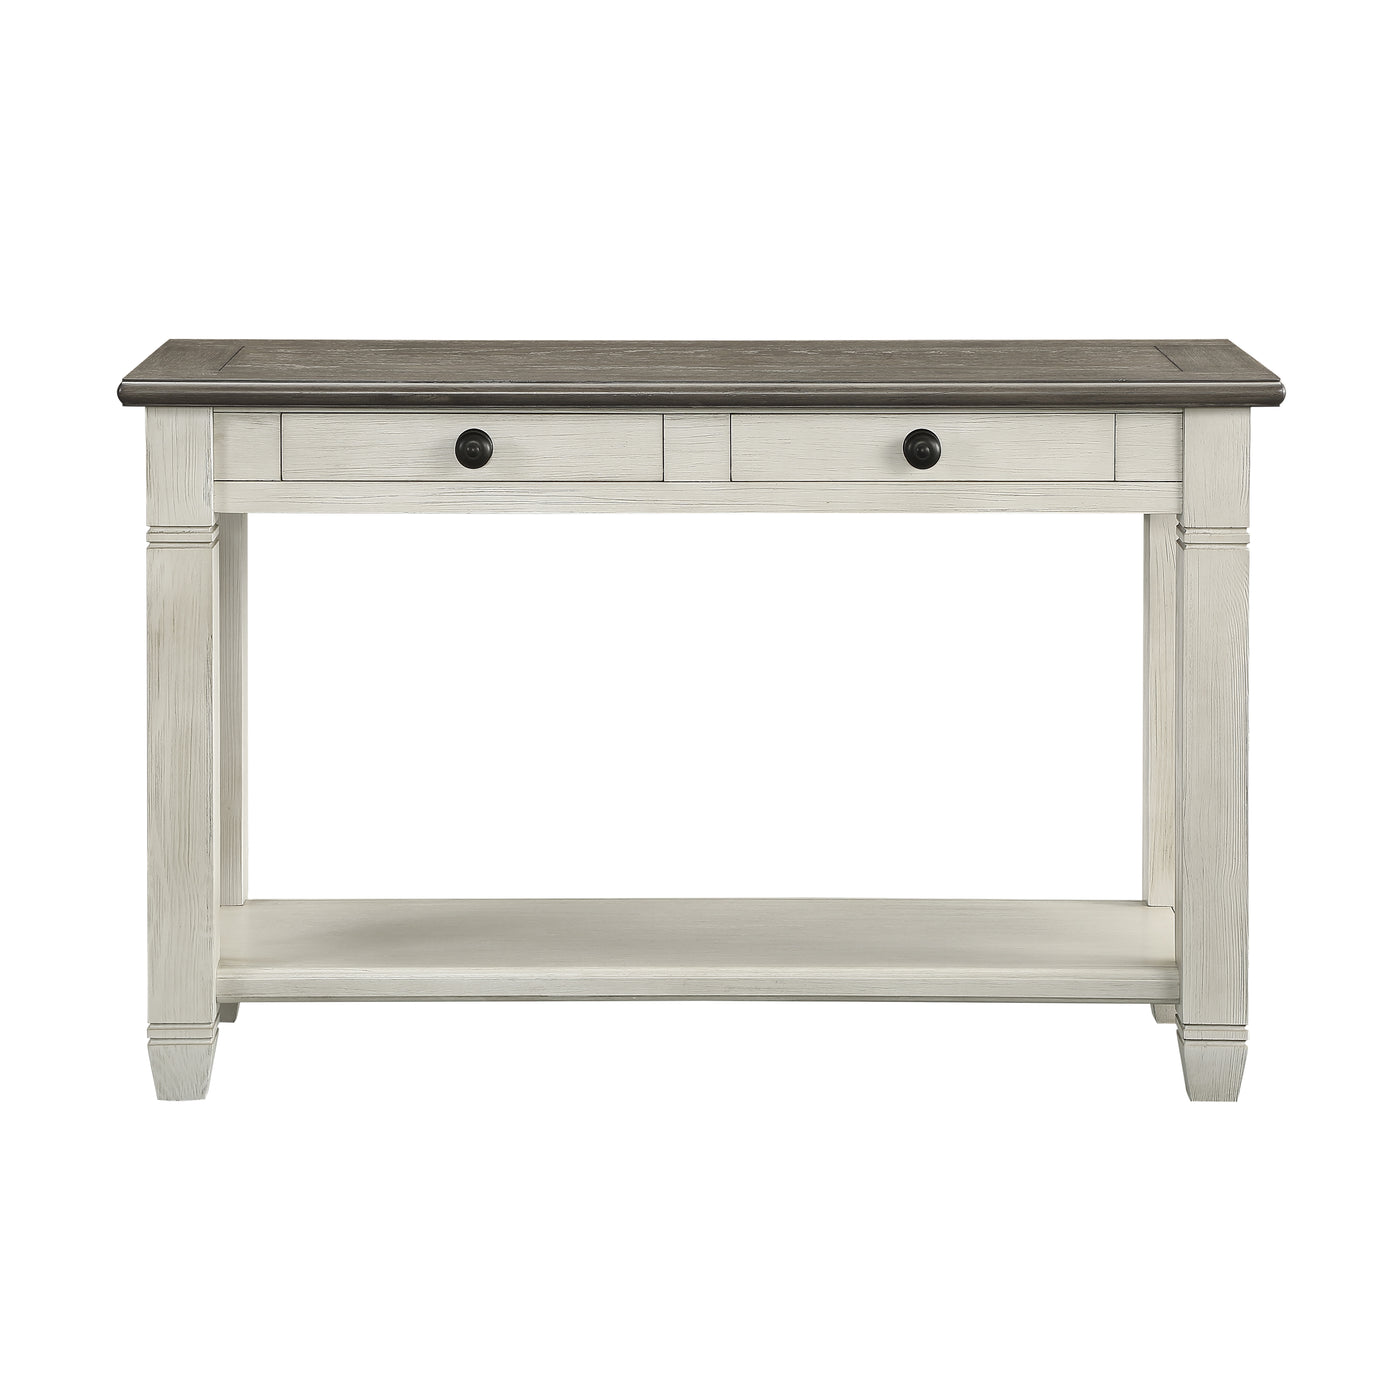 Harold Sofa Table - Antique White and Brown